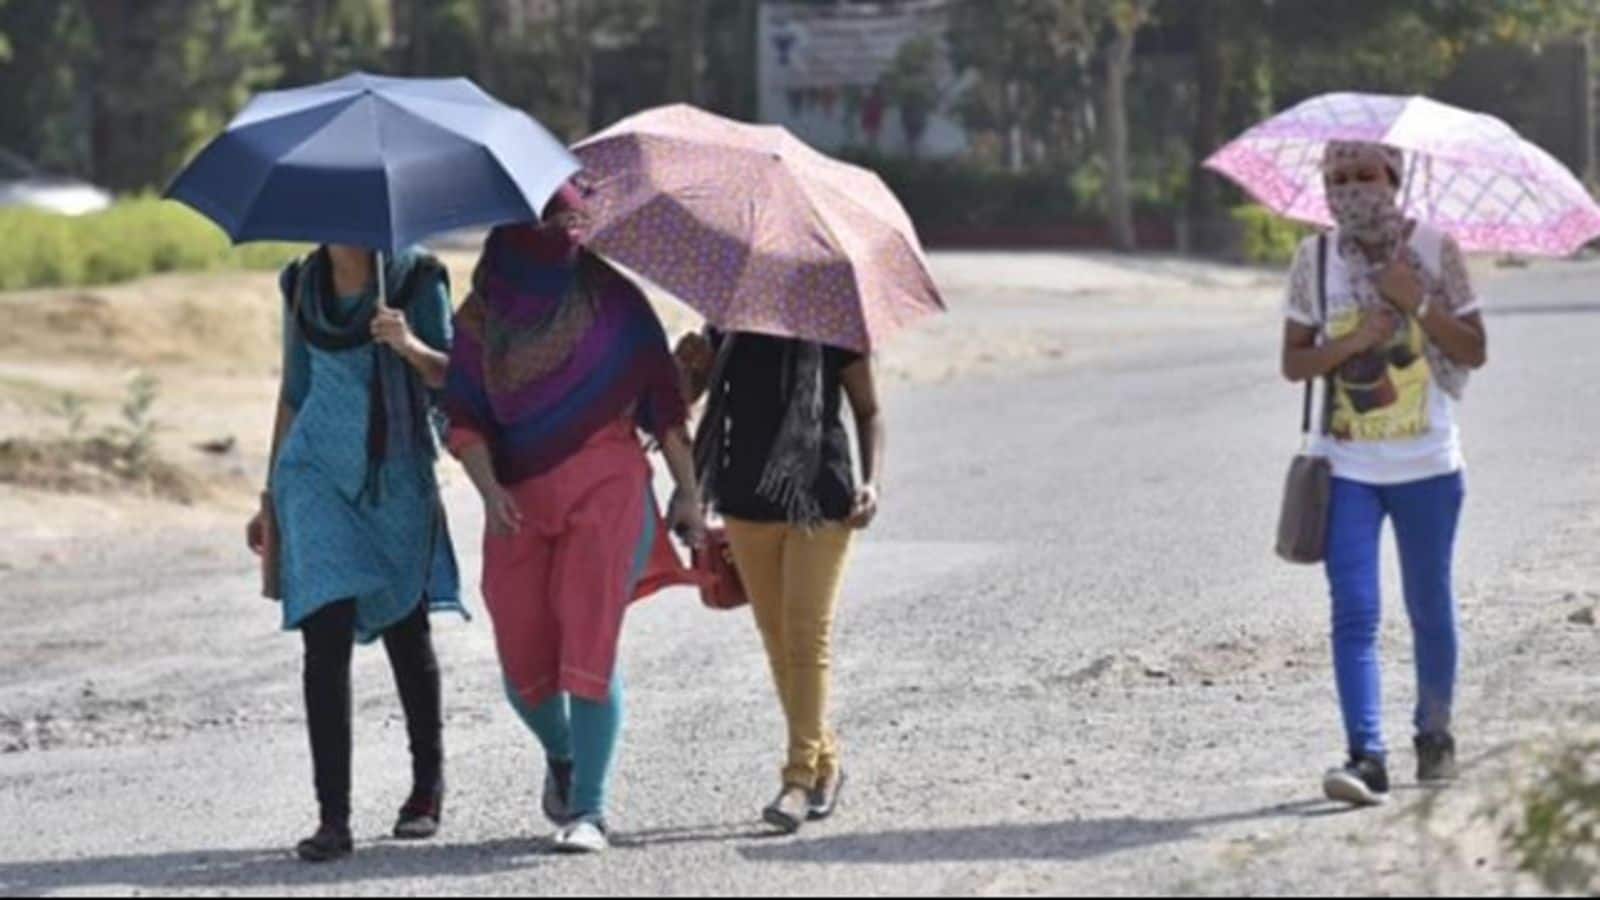 IMD issues 'heatwave to severe heatwave' warning for several states